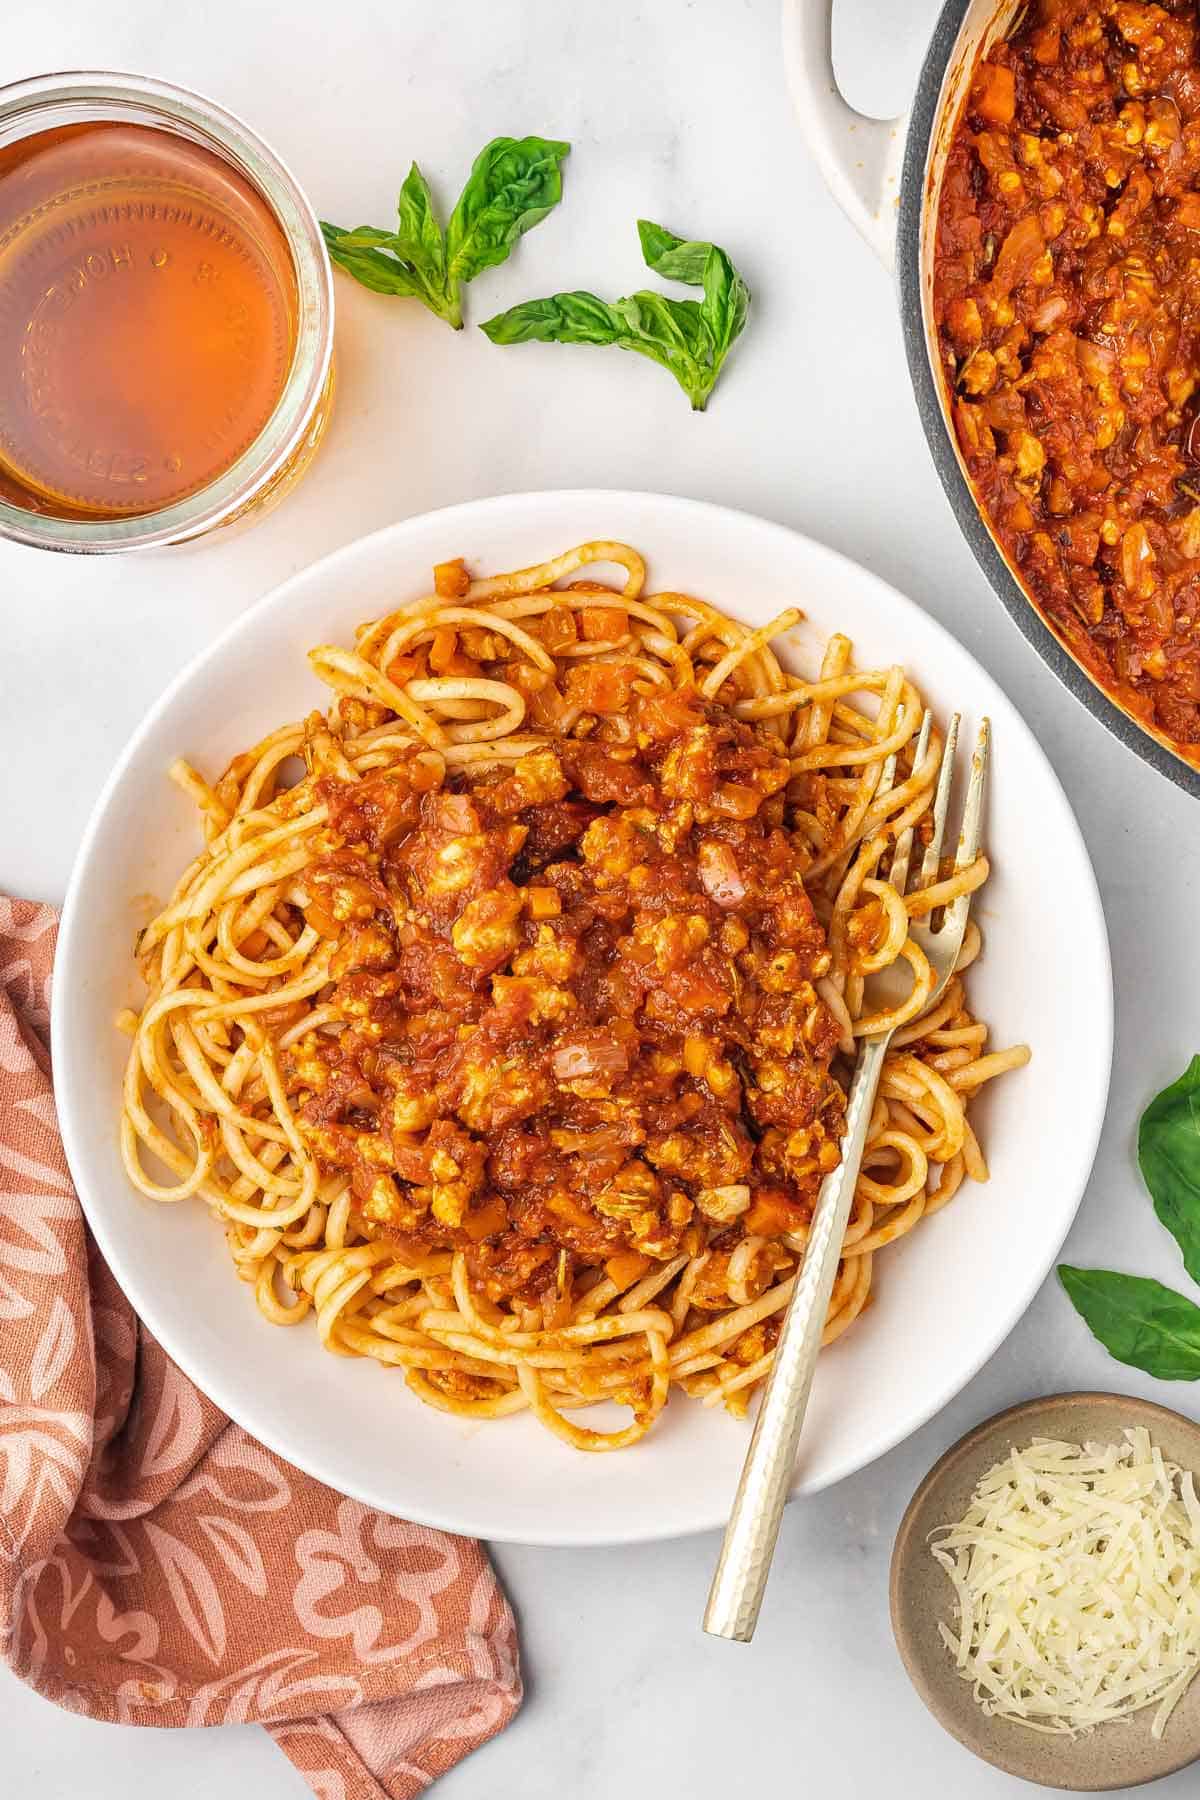 A plate of spaghetti noodles topped with ground chicken bolognese with a fork.